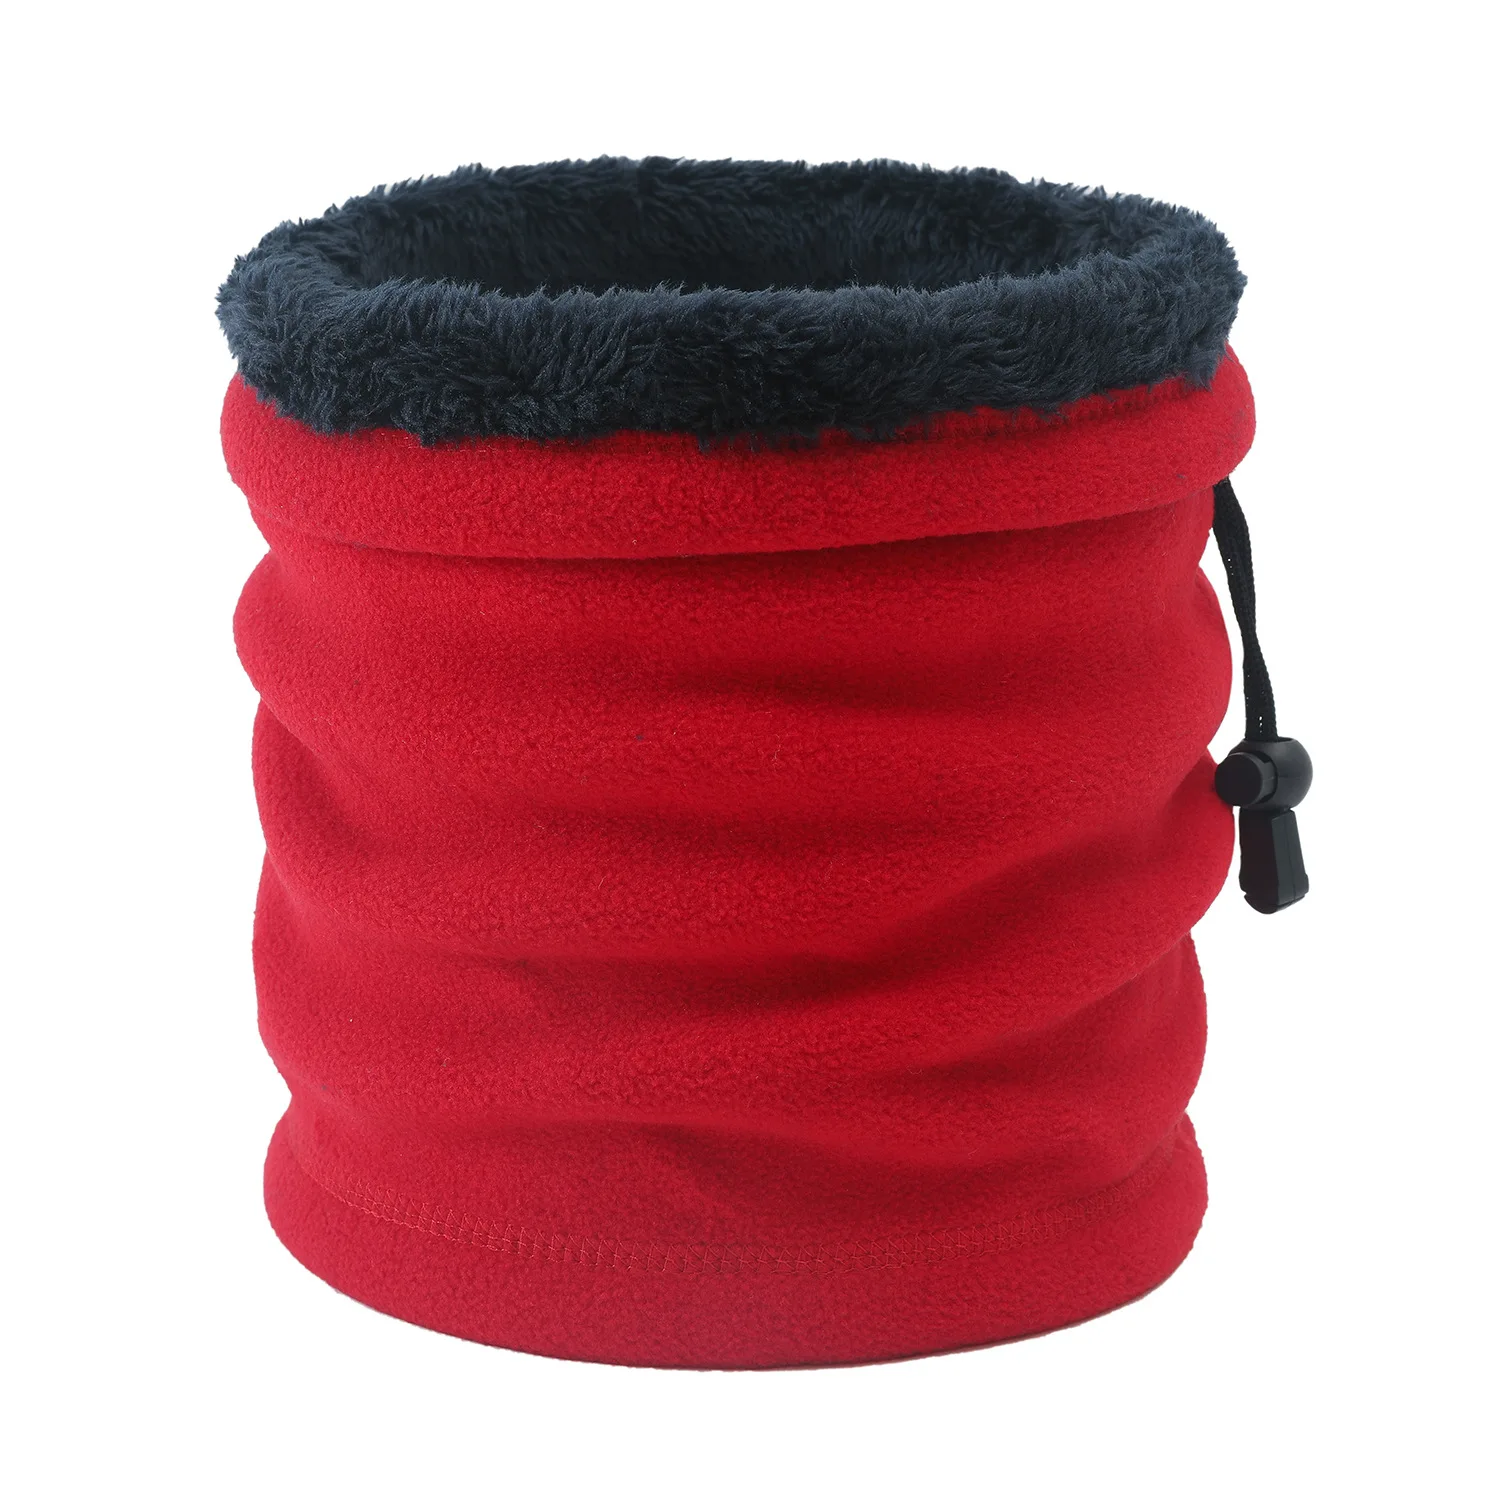 

Winter Unisex Warm Knitted Ring Scarf Fleece Inside Elastic Knit Plush Scarves Men Women Thick Warmers Cotton Snood Neck Ring